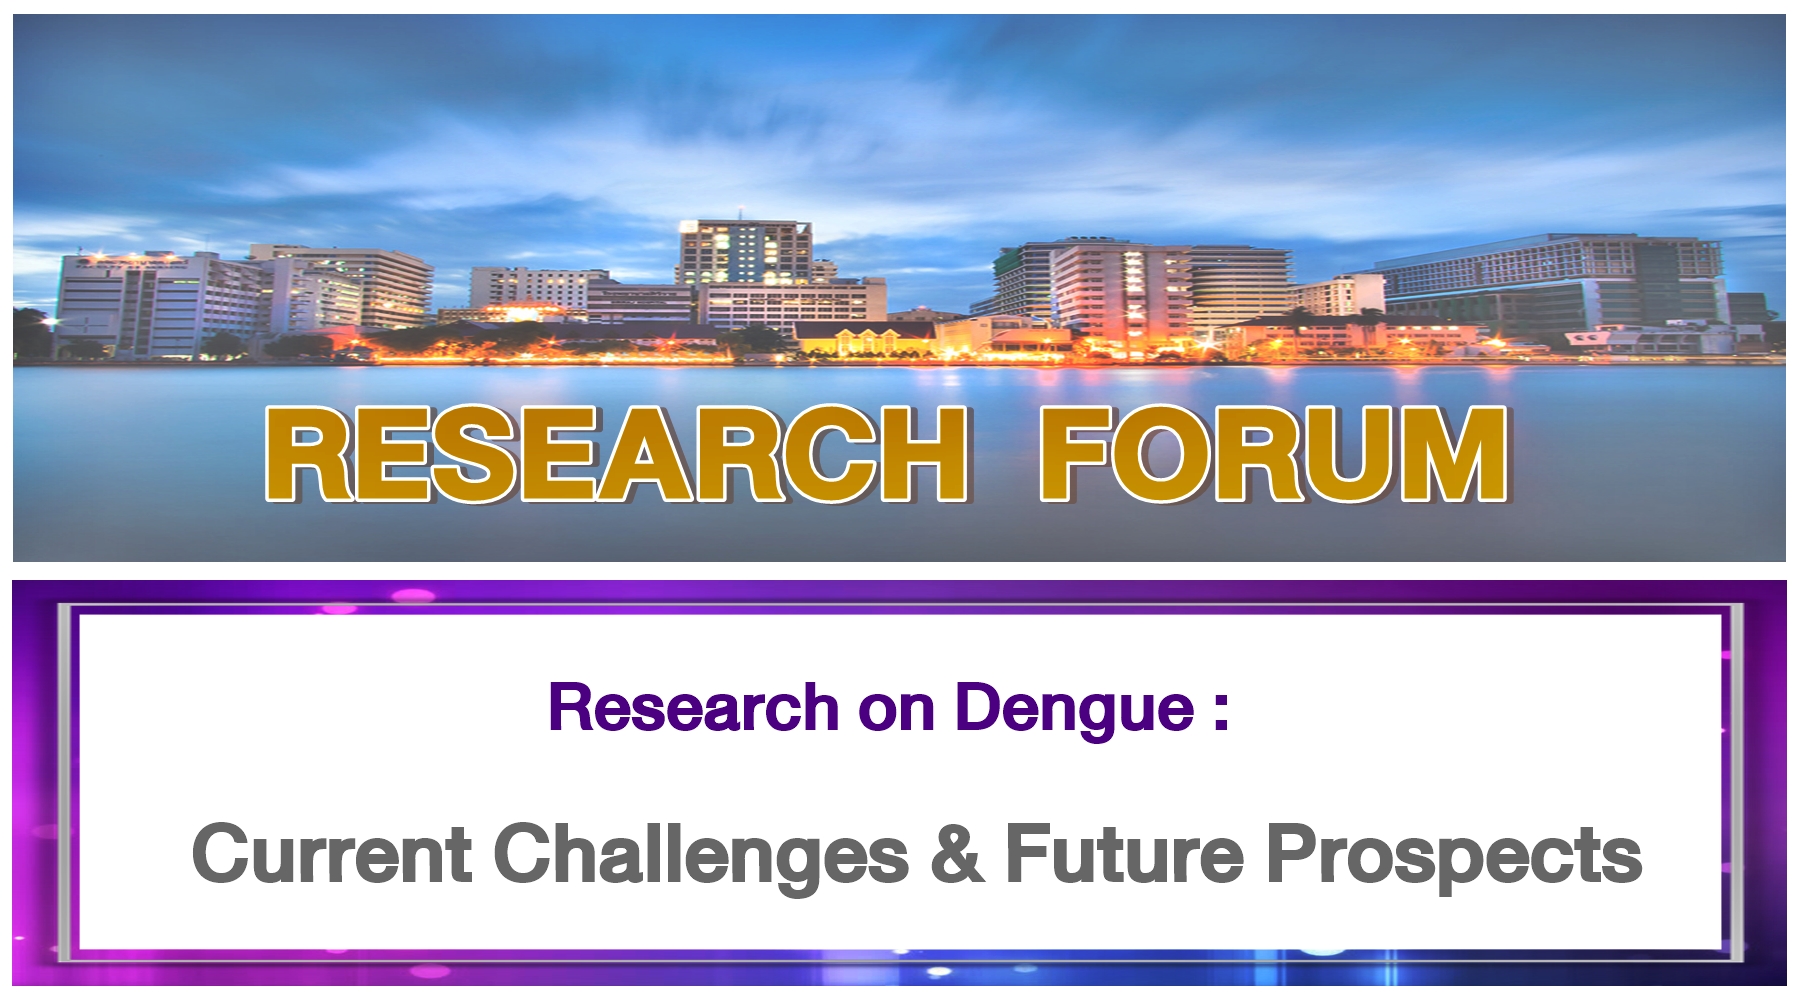 Research on Dengue: Current Challenges & Future Prospects